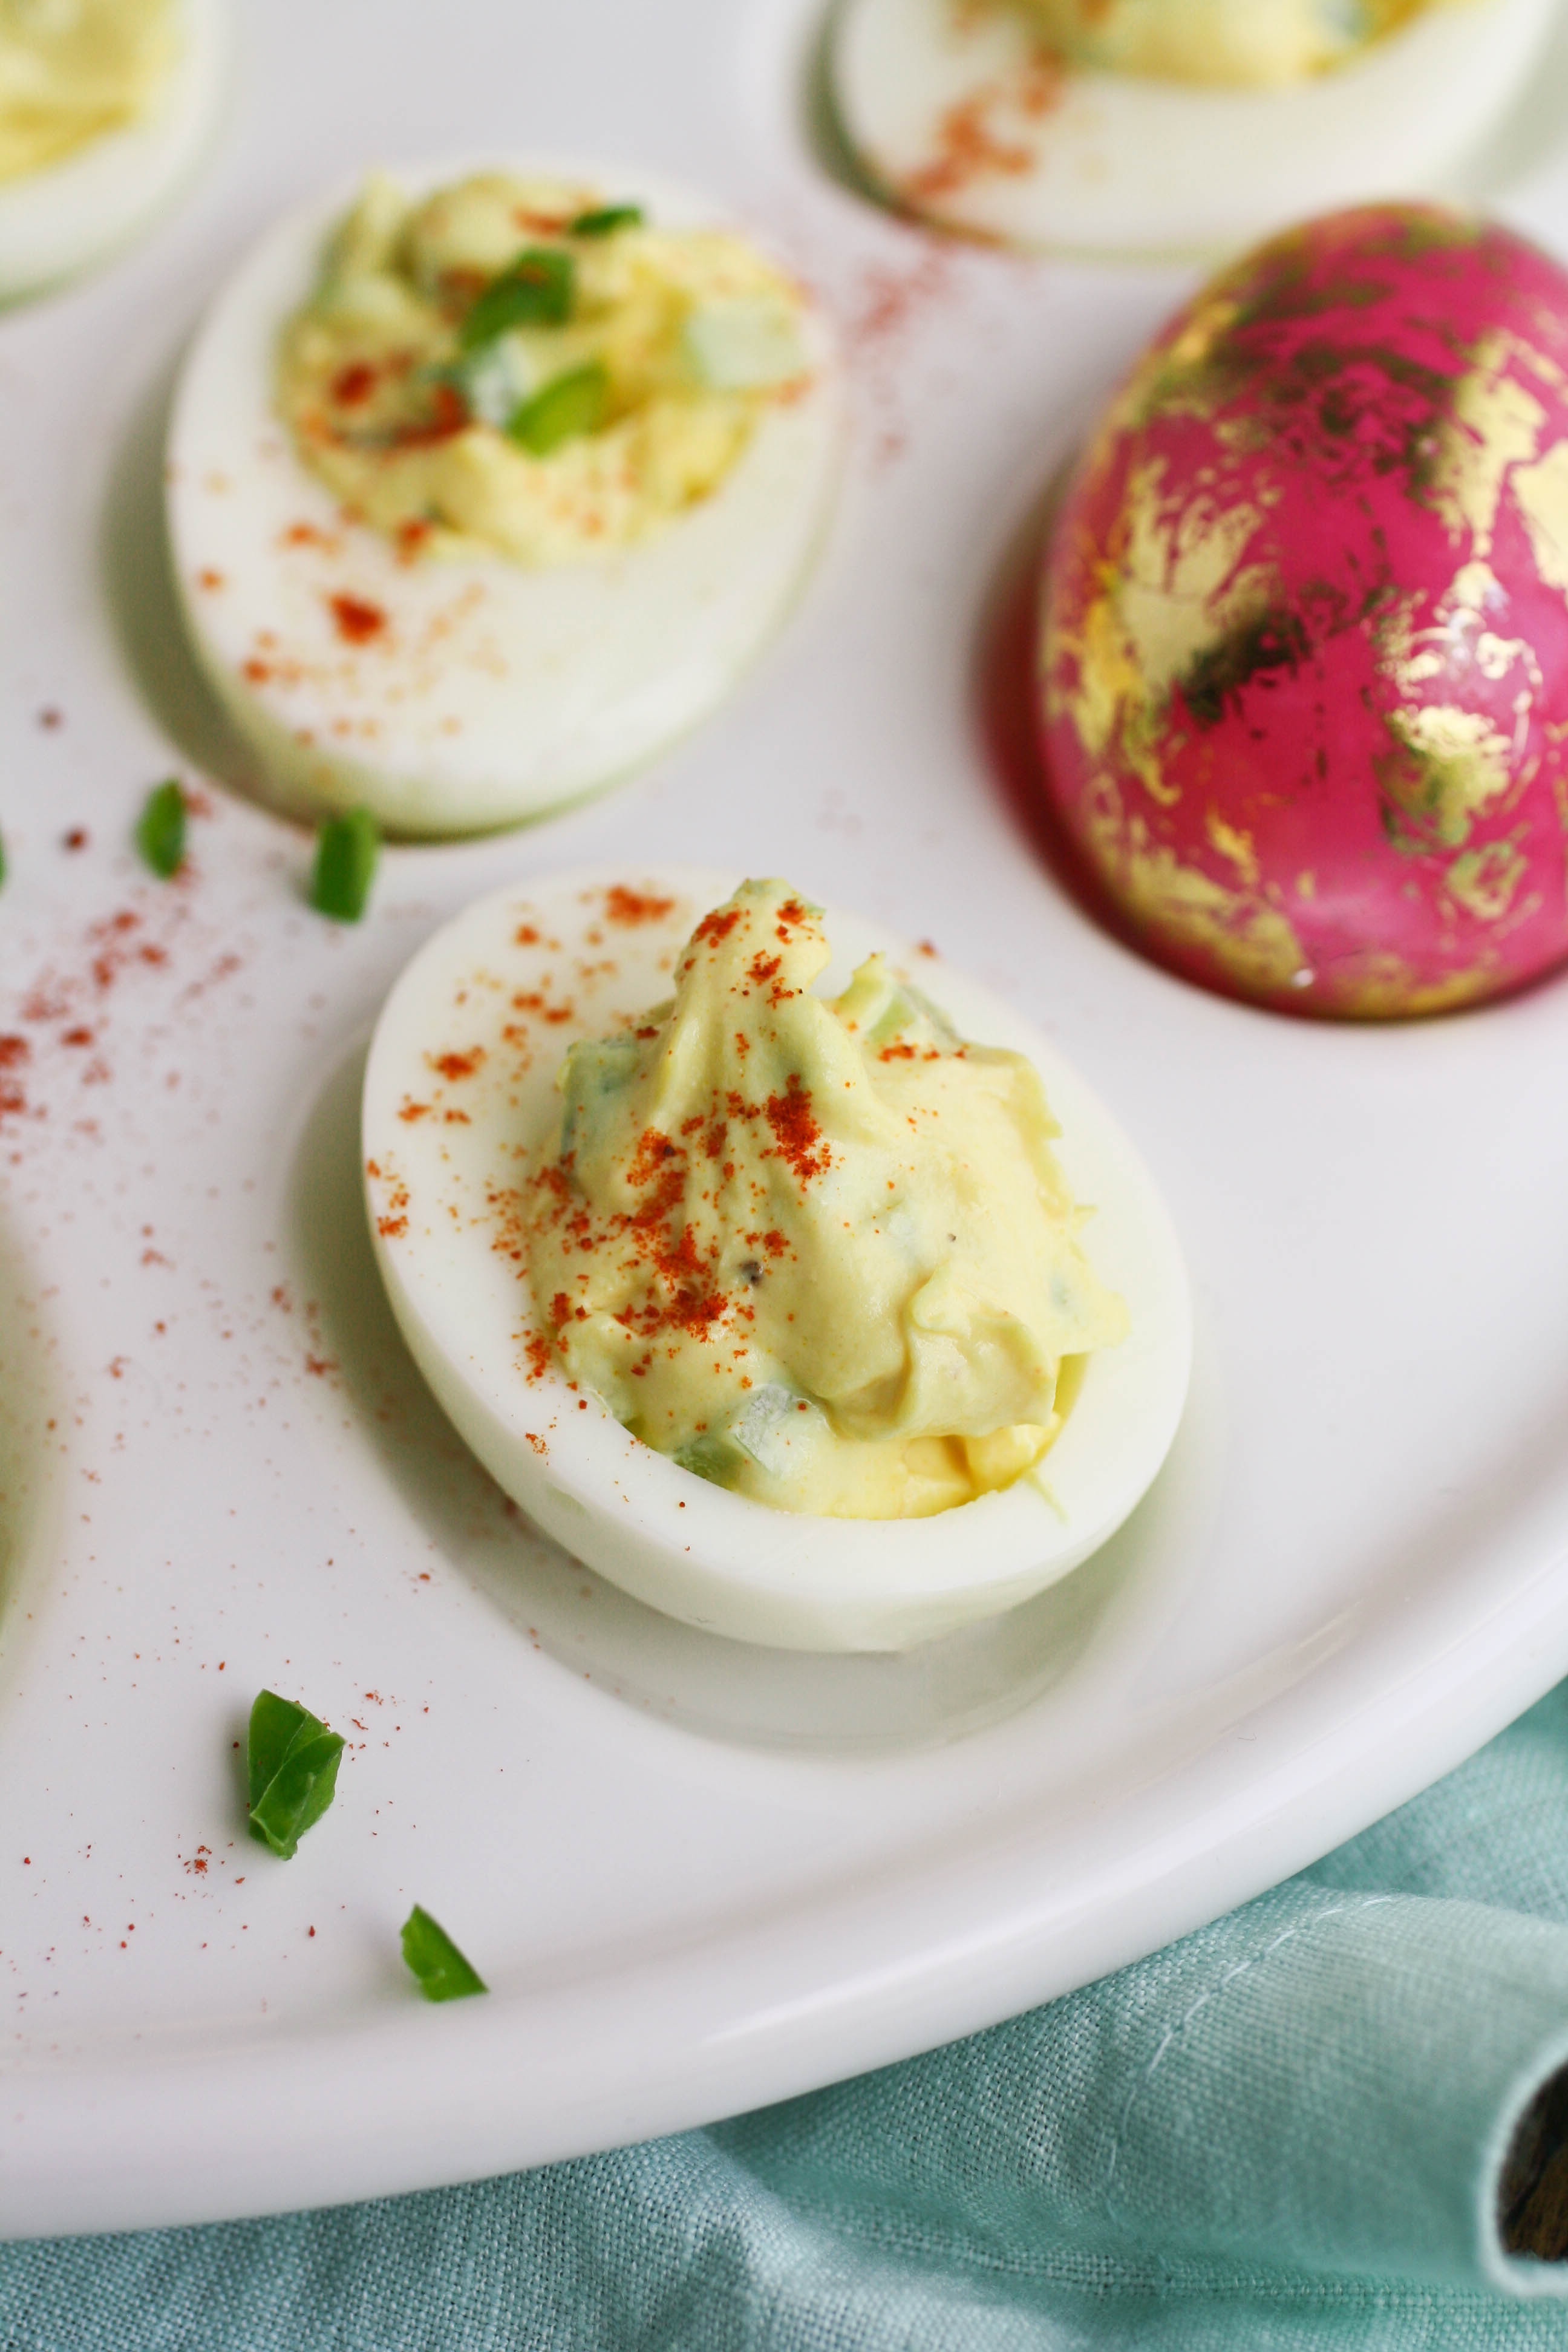 Jalapeño Deviled Eggs have great flavor and texture. You'll love these for your next get together!